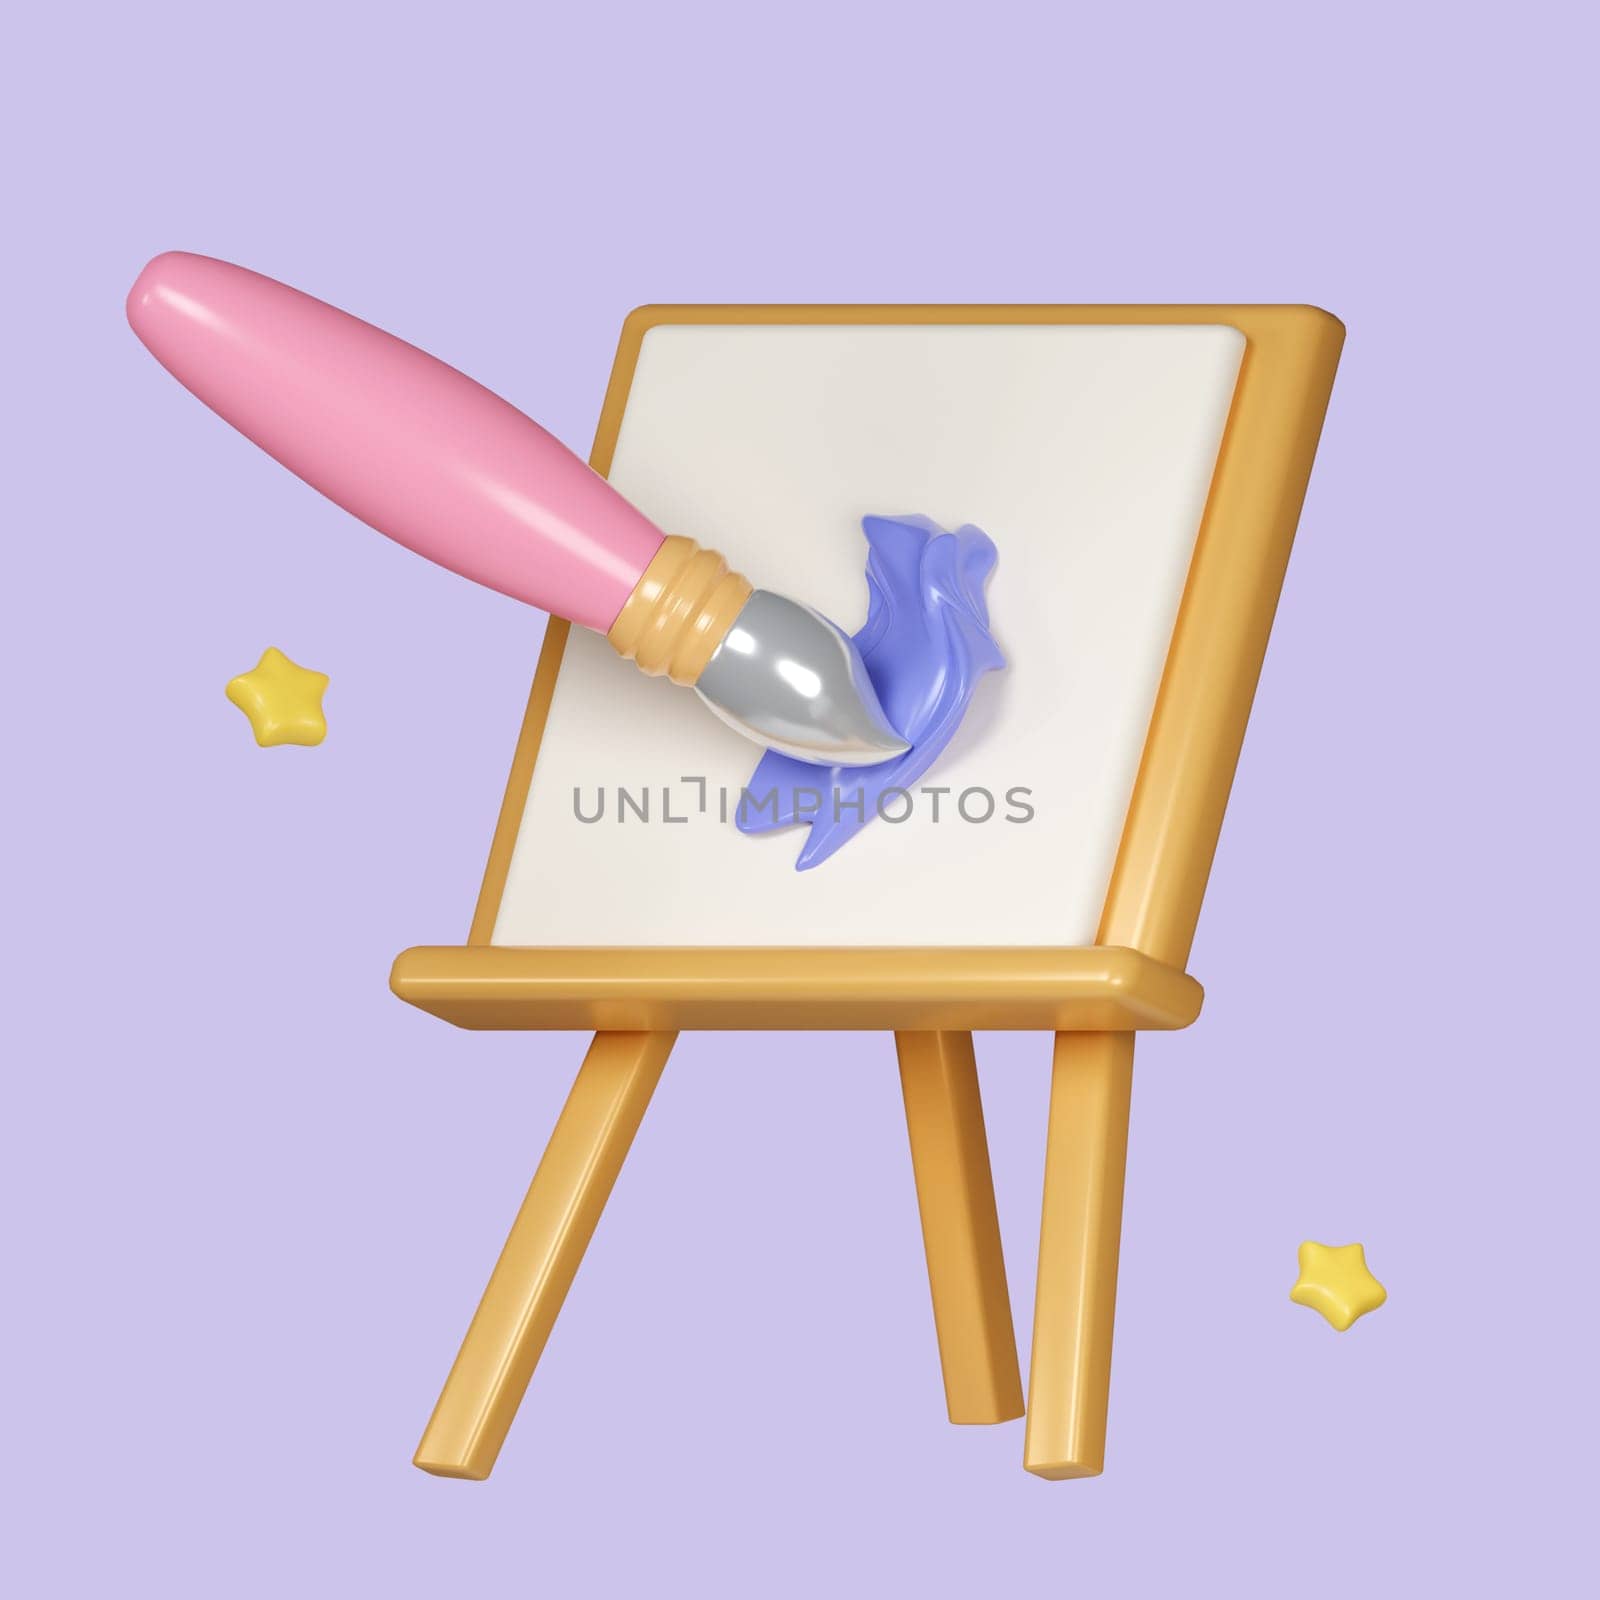 Easel, canvas with drawings and paints, brush. Simple icon for web and app. Modern trendy design. icon isolated on pastel background. icon symbol clipping path. education. 3d render illustration by meepiangraphic